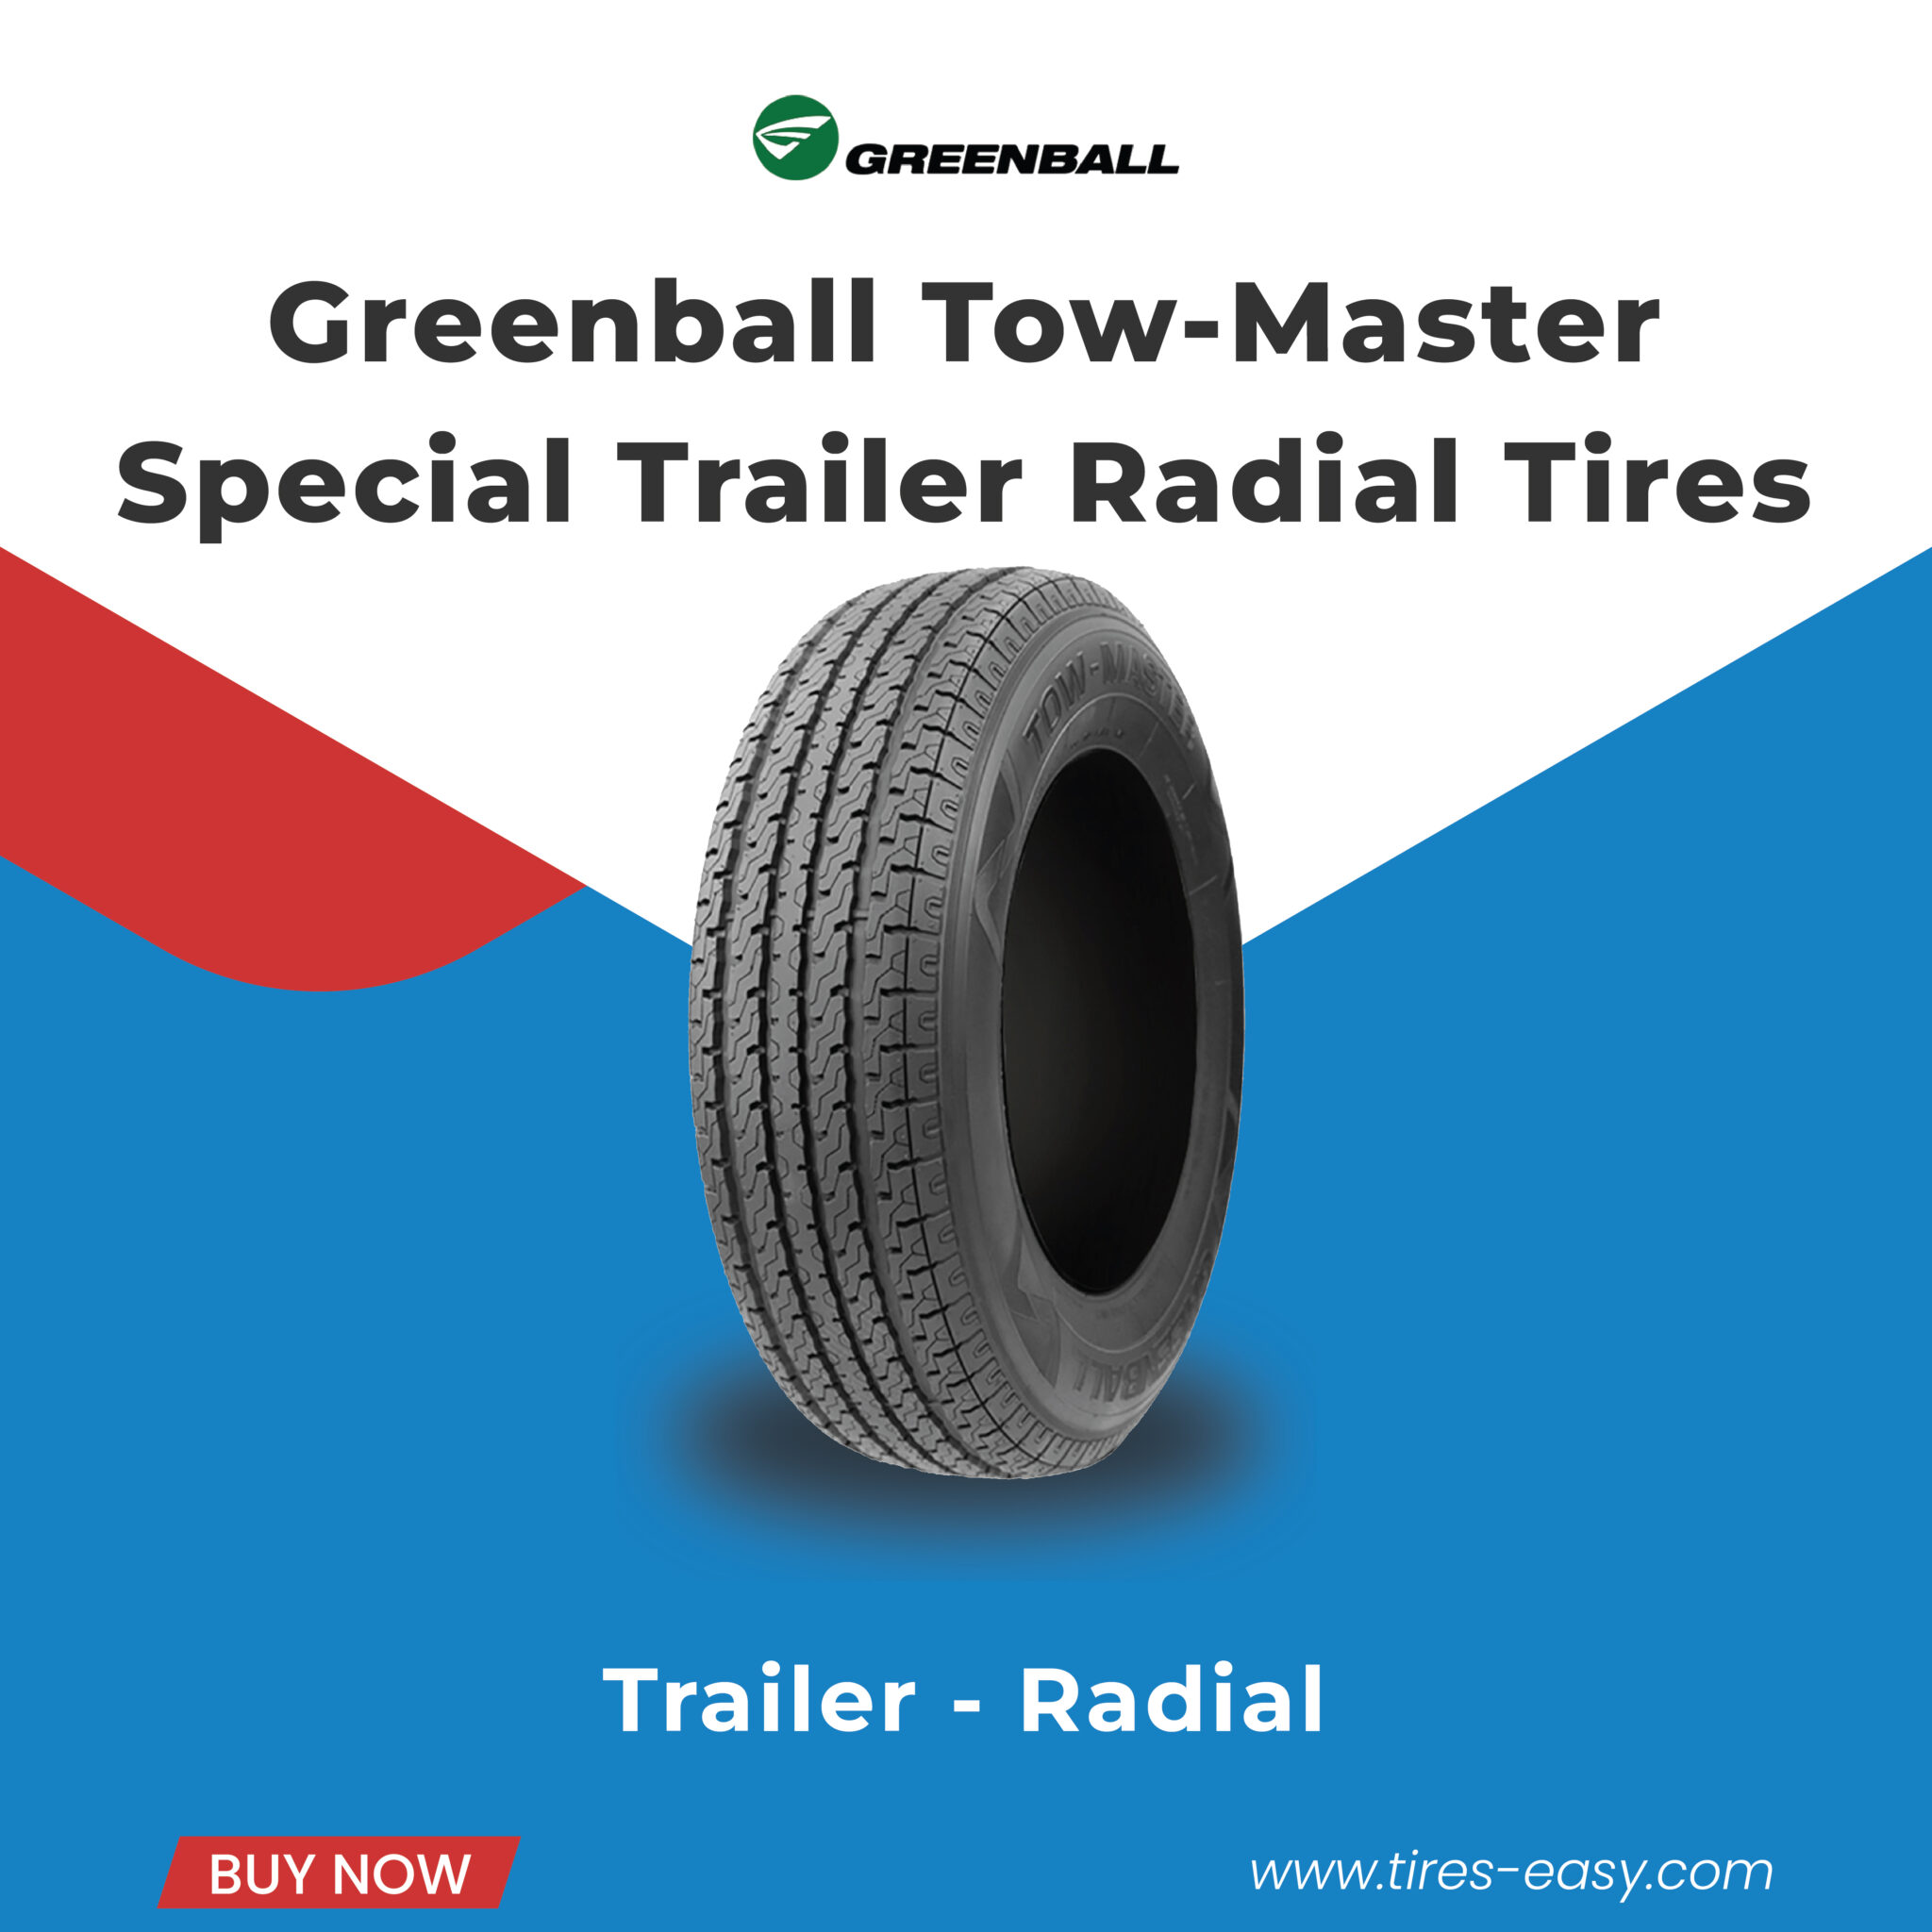 Tow-Master STR (Special Trailer Radial)